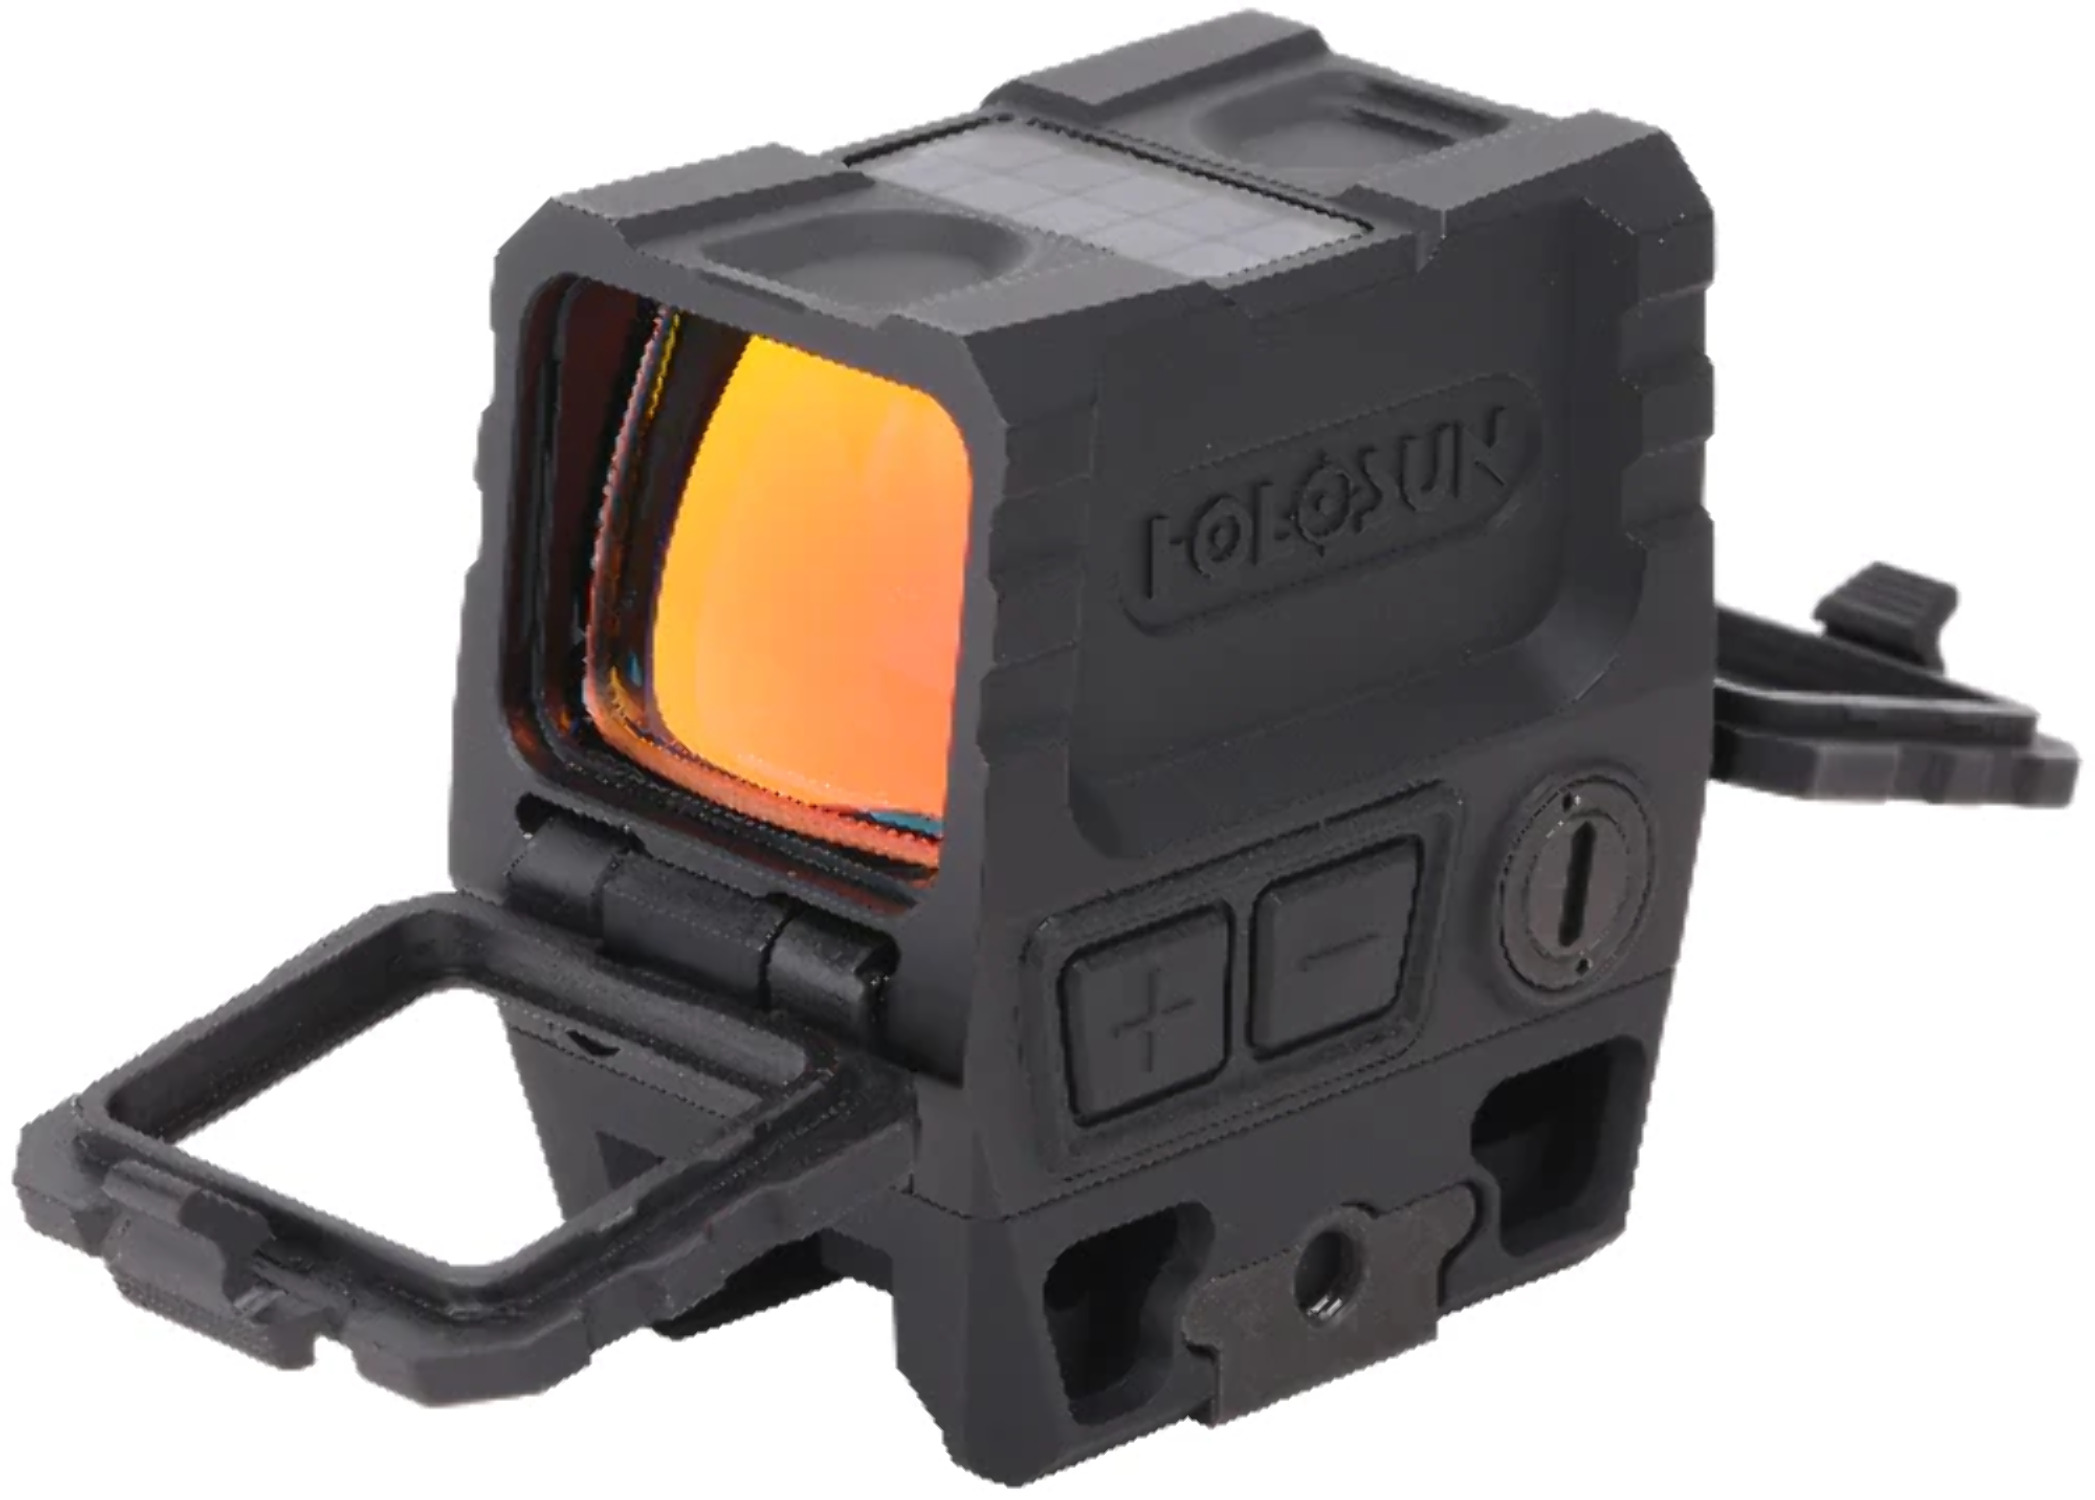 Holosun AEMS Advanced Enclosed Micro Sight - Red Multi-Reticle System - image 2 of 2